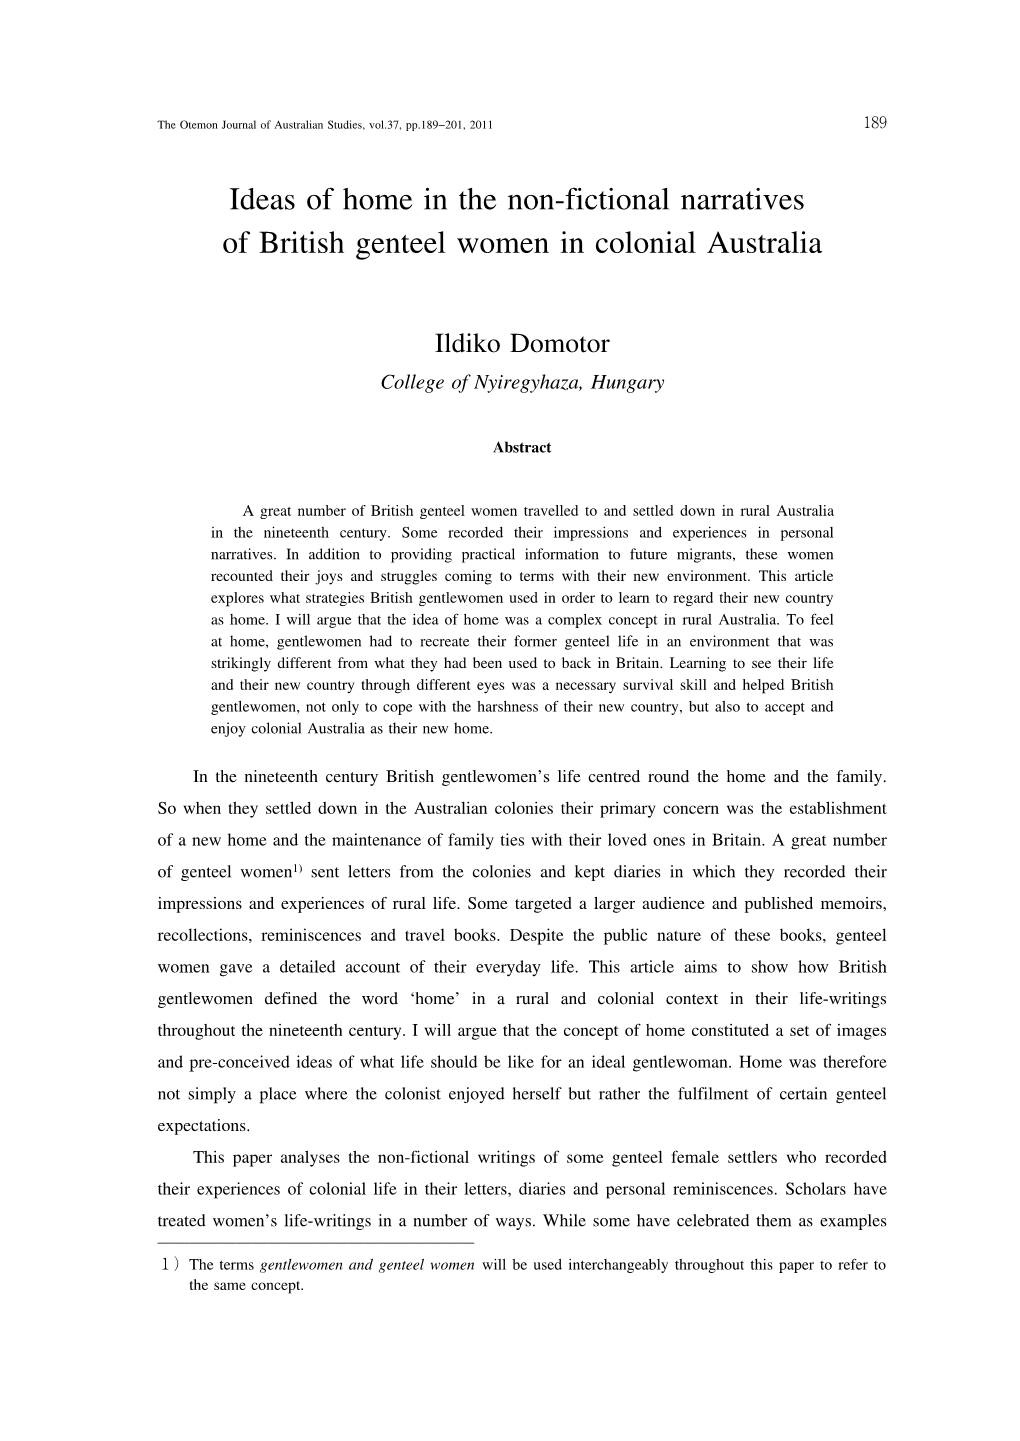 Ideas of Home in the Non-Fictional Narratives of British Genteel Women in Colonial Australia